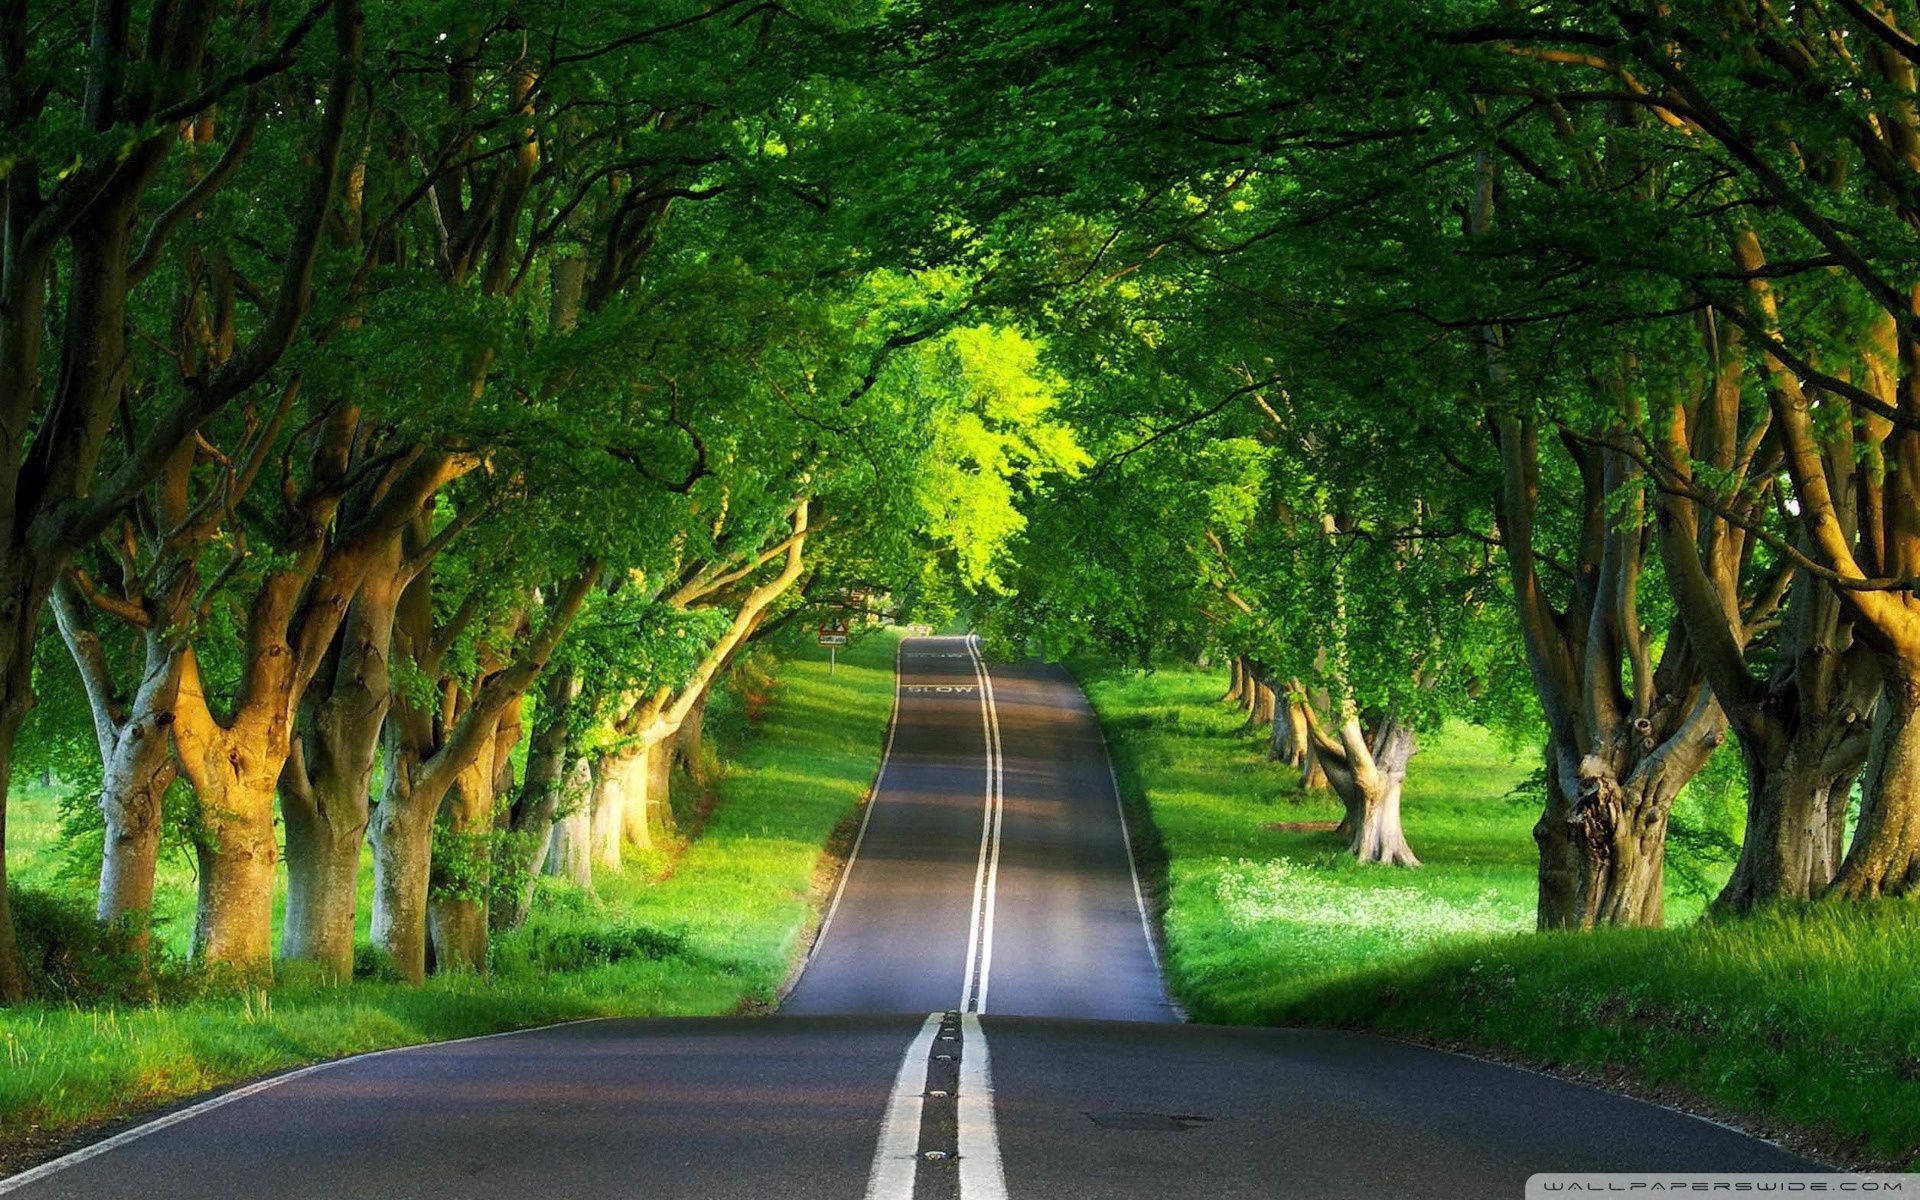 “A Warm Road Through the Trees on a Stunning Summer Day” Wallpaper